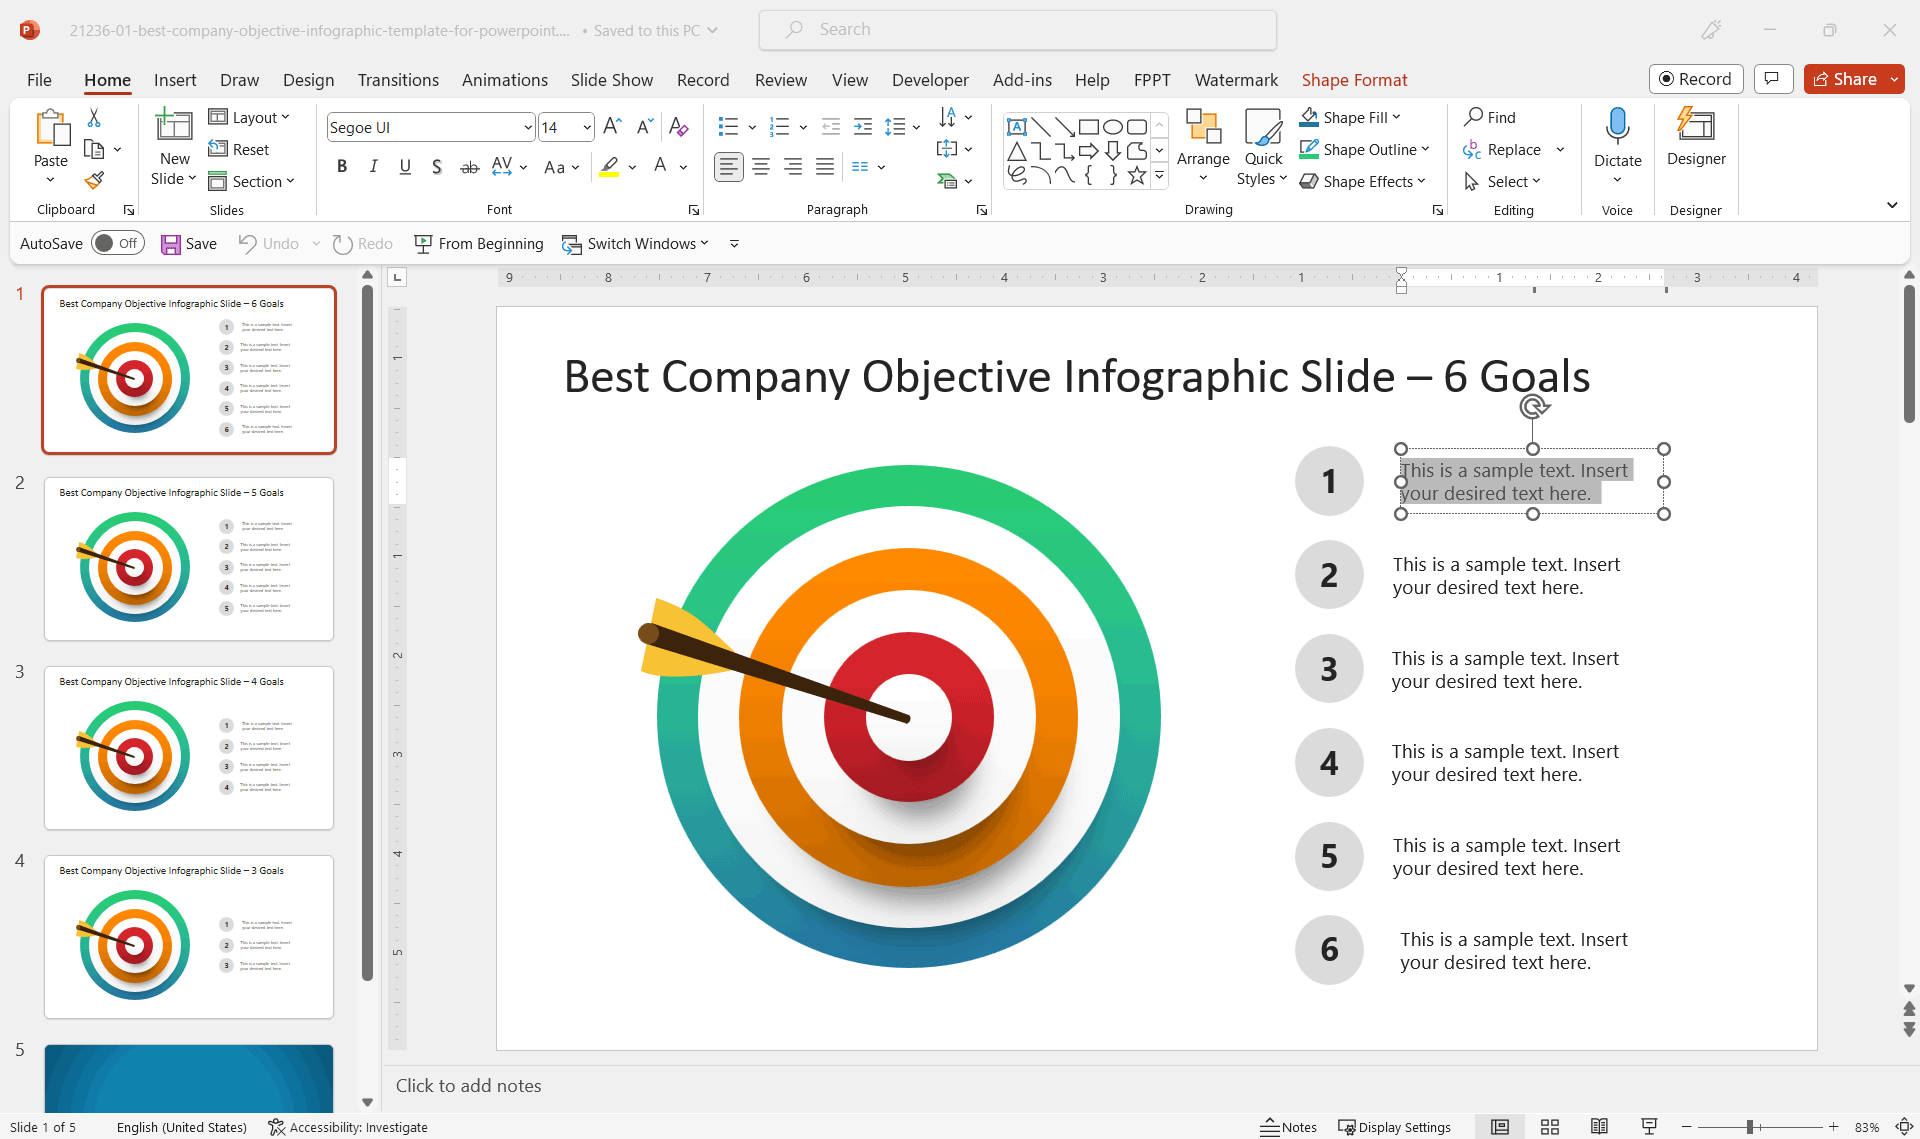 Download 100% editable company objectives slide template for PowerPoint with space to enter 6 goals.